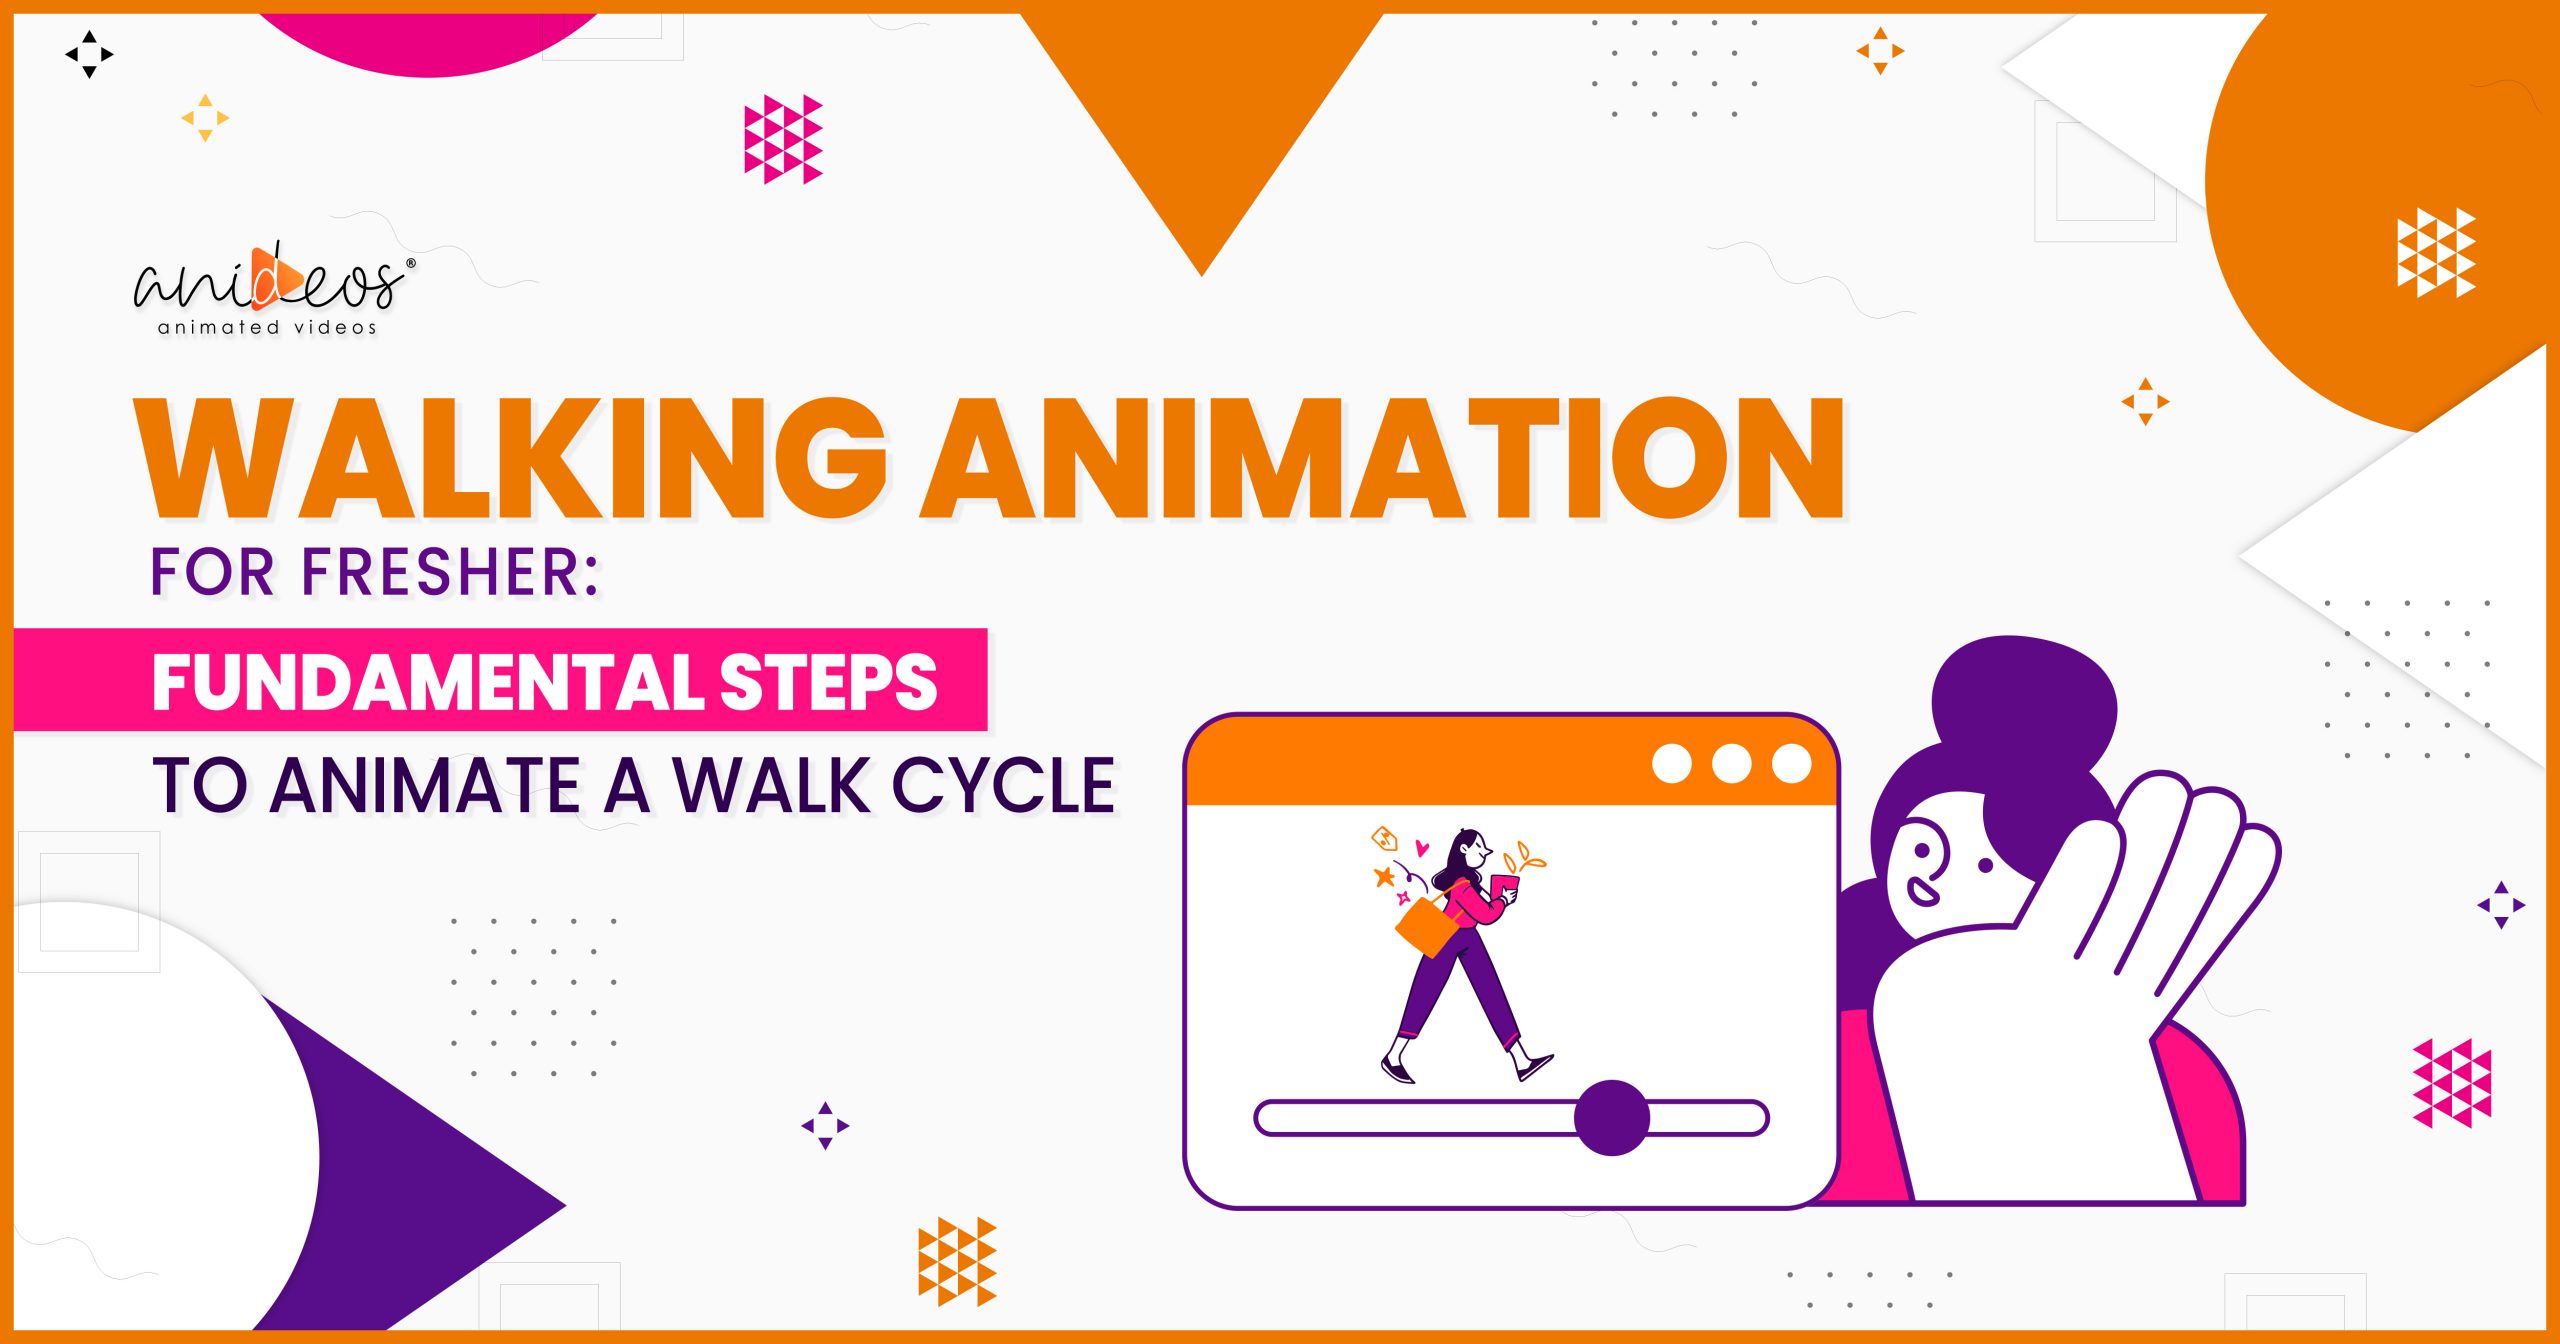 Walking Animation for Fresher: Fundamental Steps to Animate a Walk Cycle